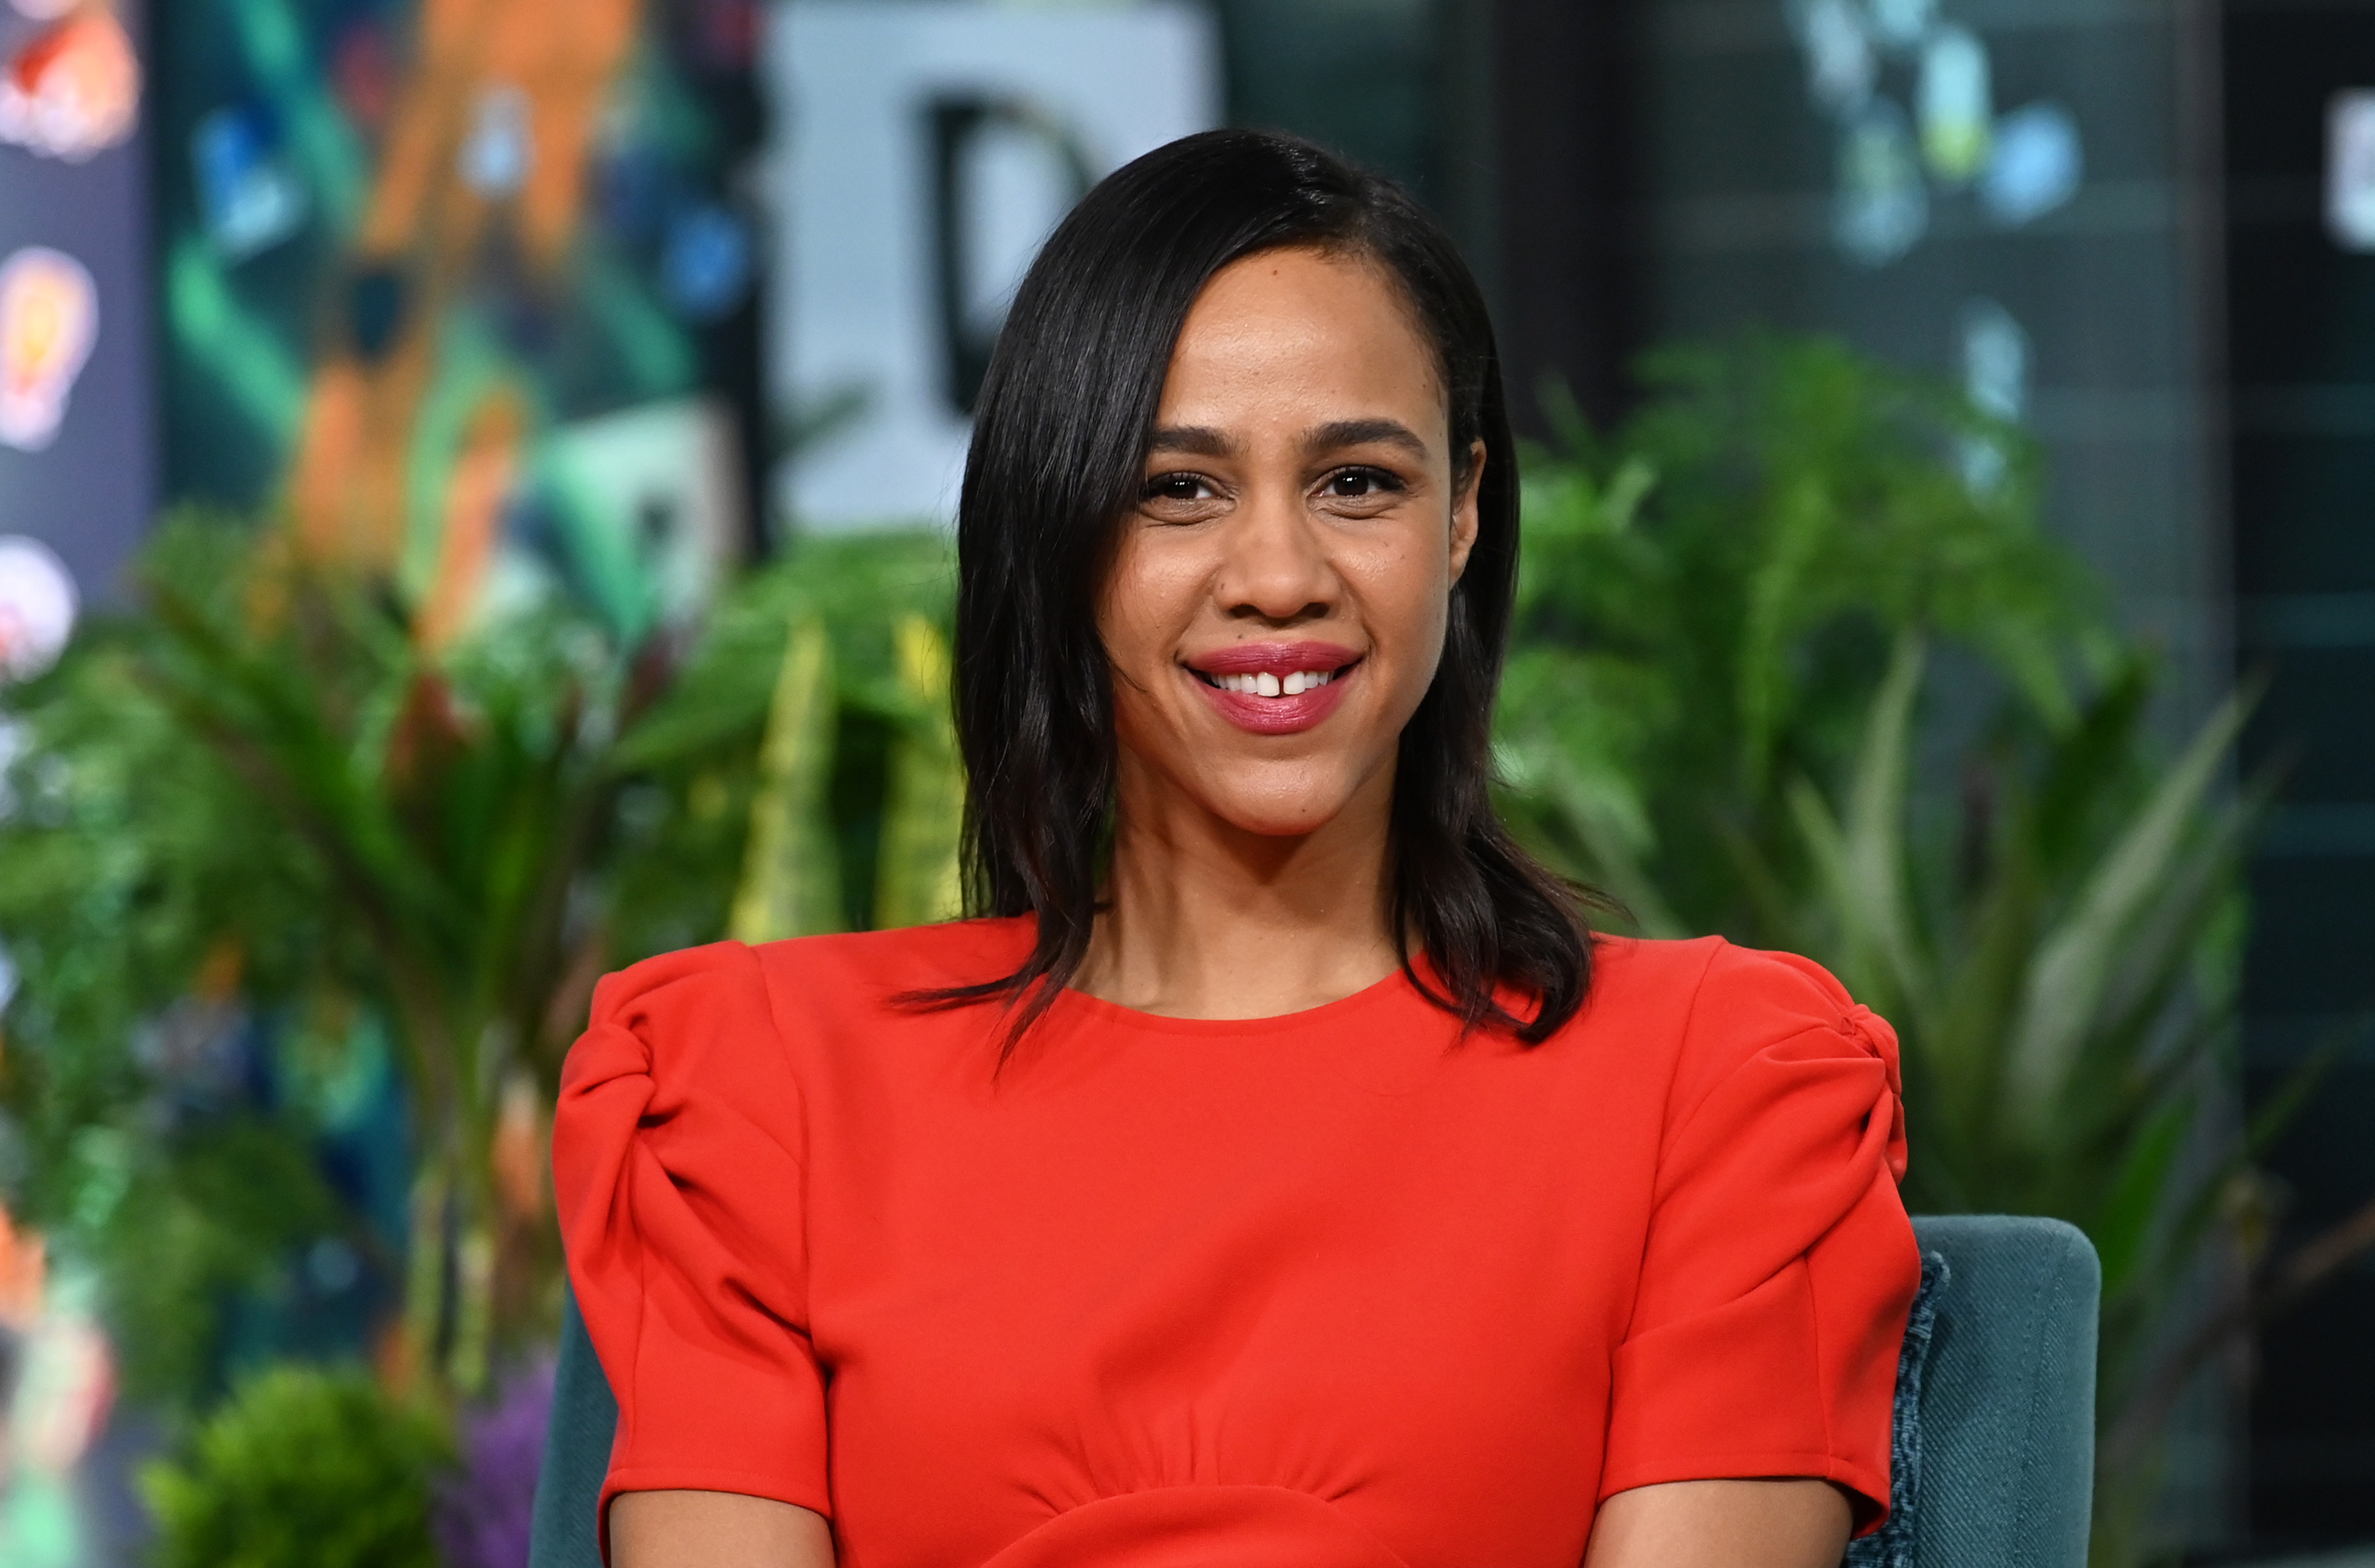 Zawe Ashton smiles while wearing a red dress during an appearance on the Build SeriesA=